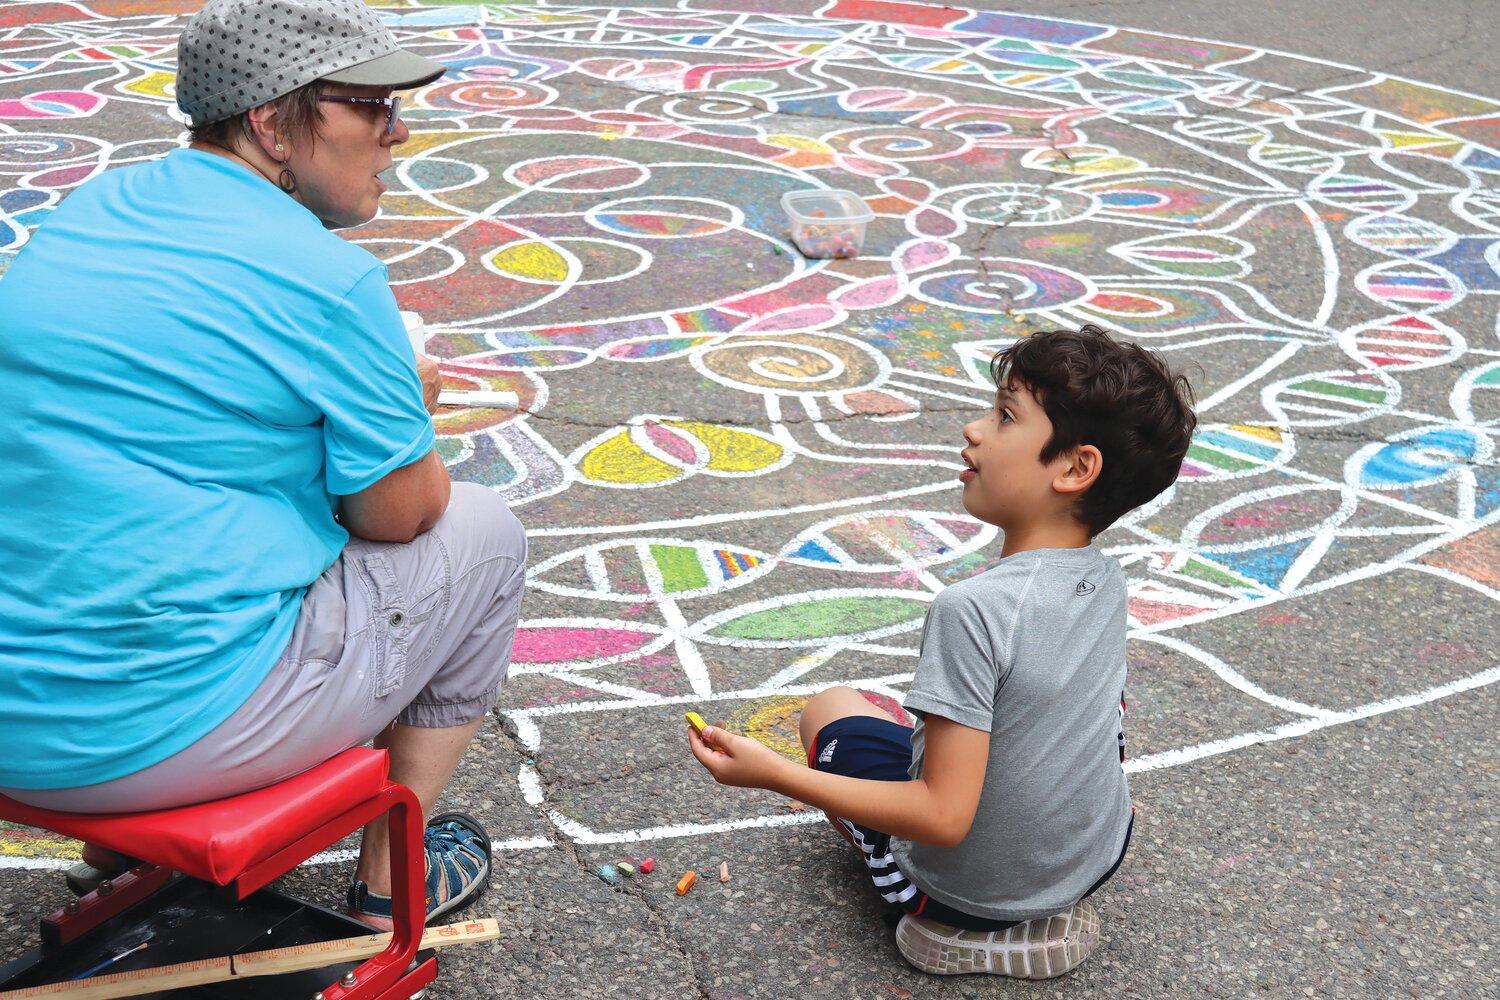 Chalk artist Sandy Forseth works on her street mandala with nine-year-old Archer Mandelman of northeast Minneapolis. Sponsoring this year’s event were the Southwest Connector, Linden Hills Dentistry, Larue’s, Heart of Tibet, Lakes Area Realty, the Harriet Brasserie, Heartfelt, and Linden Hills Neighborhood Council.